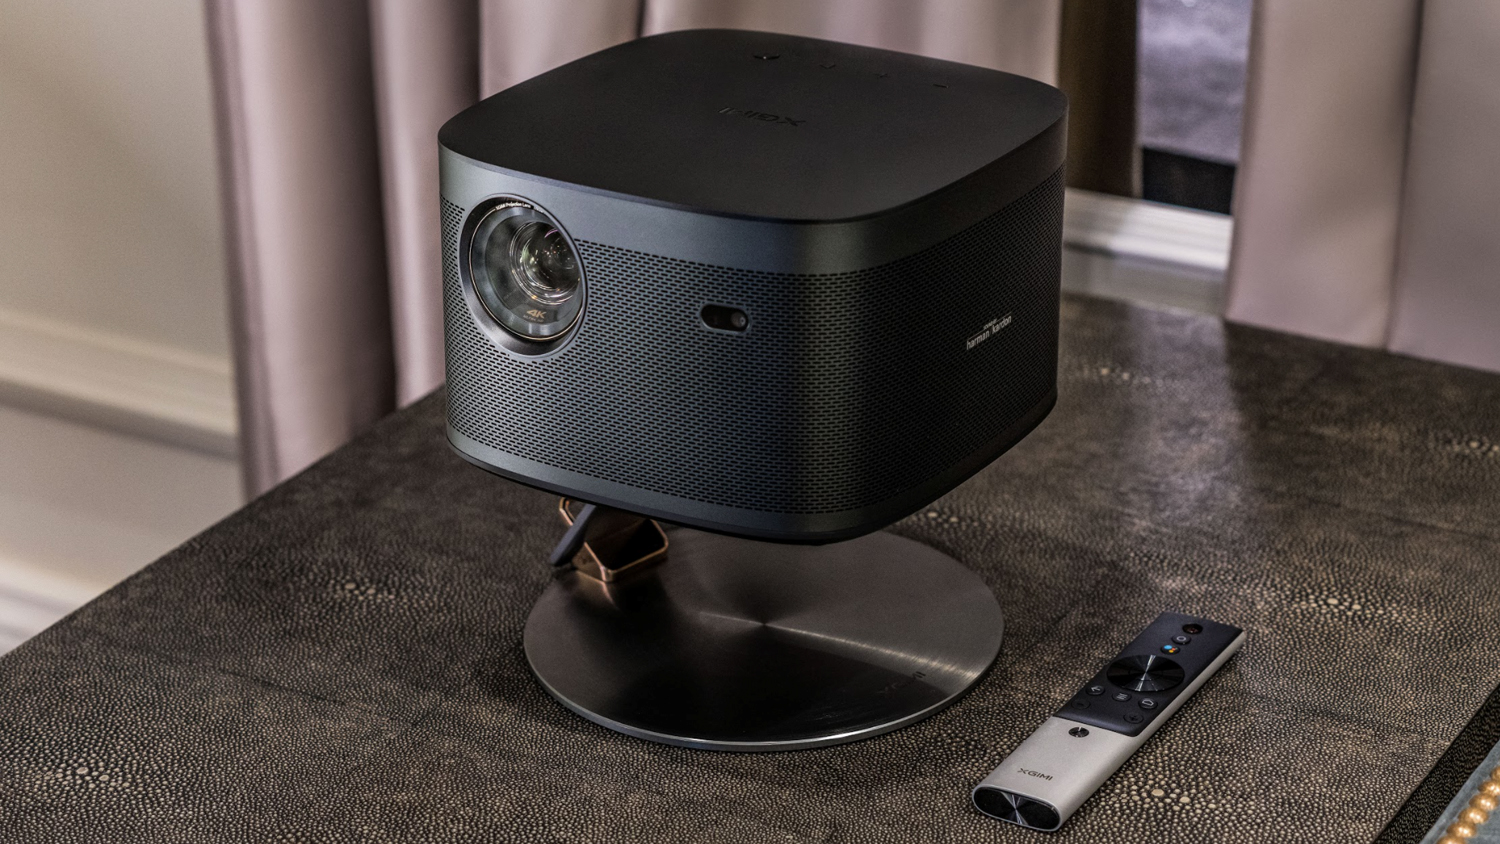 Xgimi Horizon Pro is a 4K portable projector aimed at a luxury